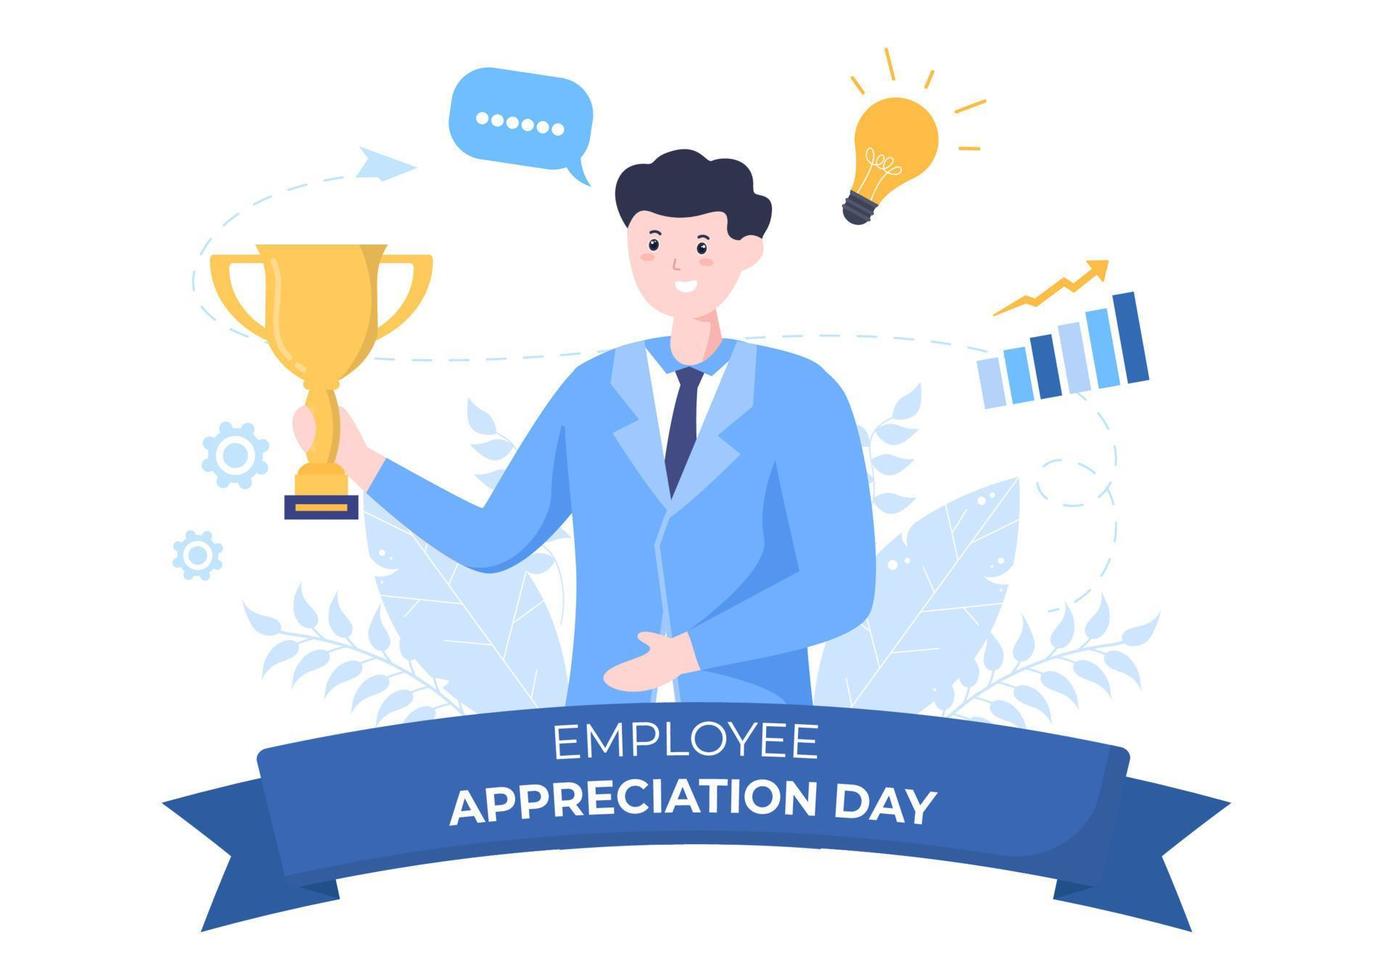 Happy Employee Appreciation Day Cartoon Illustration to Give Thanks or Recognition for their Employees with with Great Job or Trophy in Flat Style vector